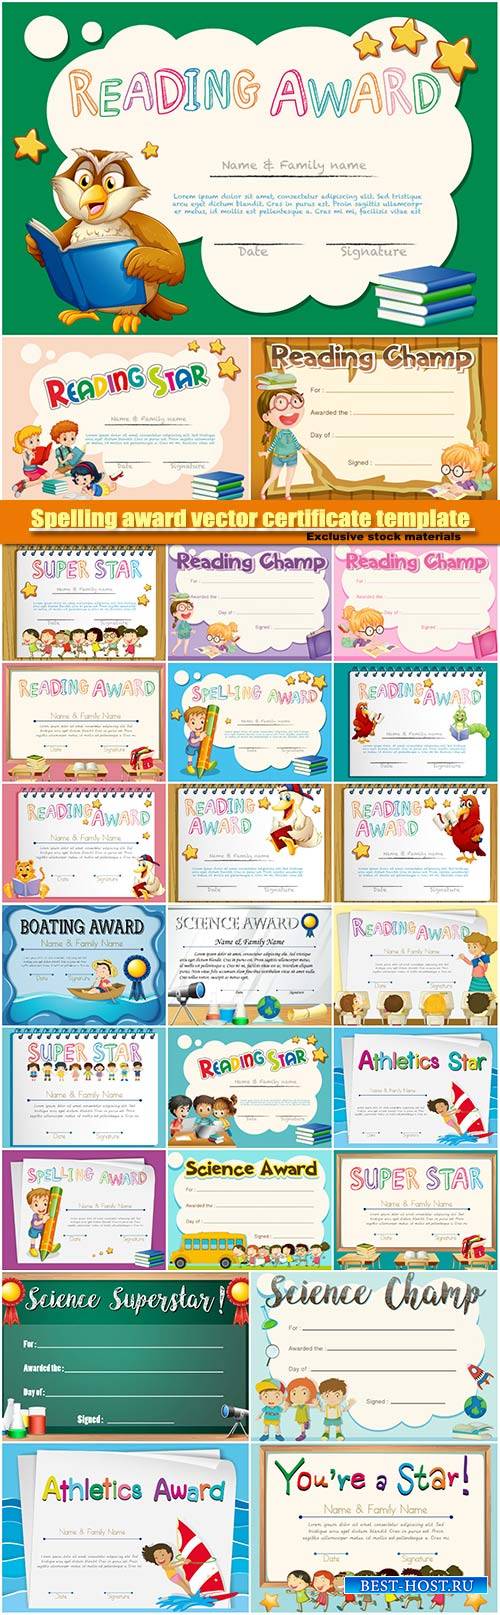 Spelling award vector certificate template with kids